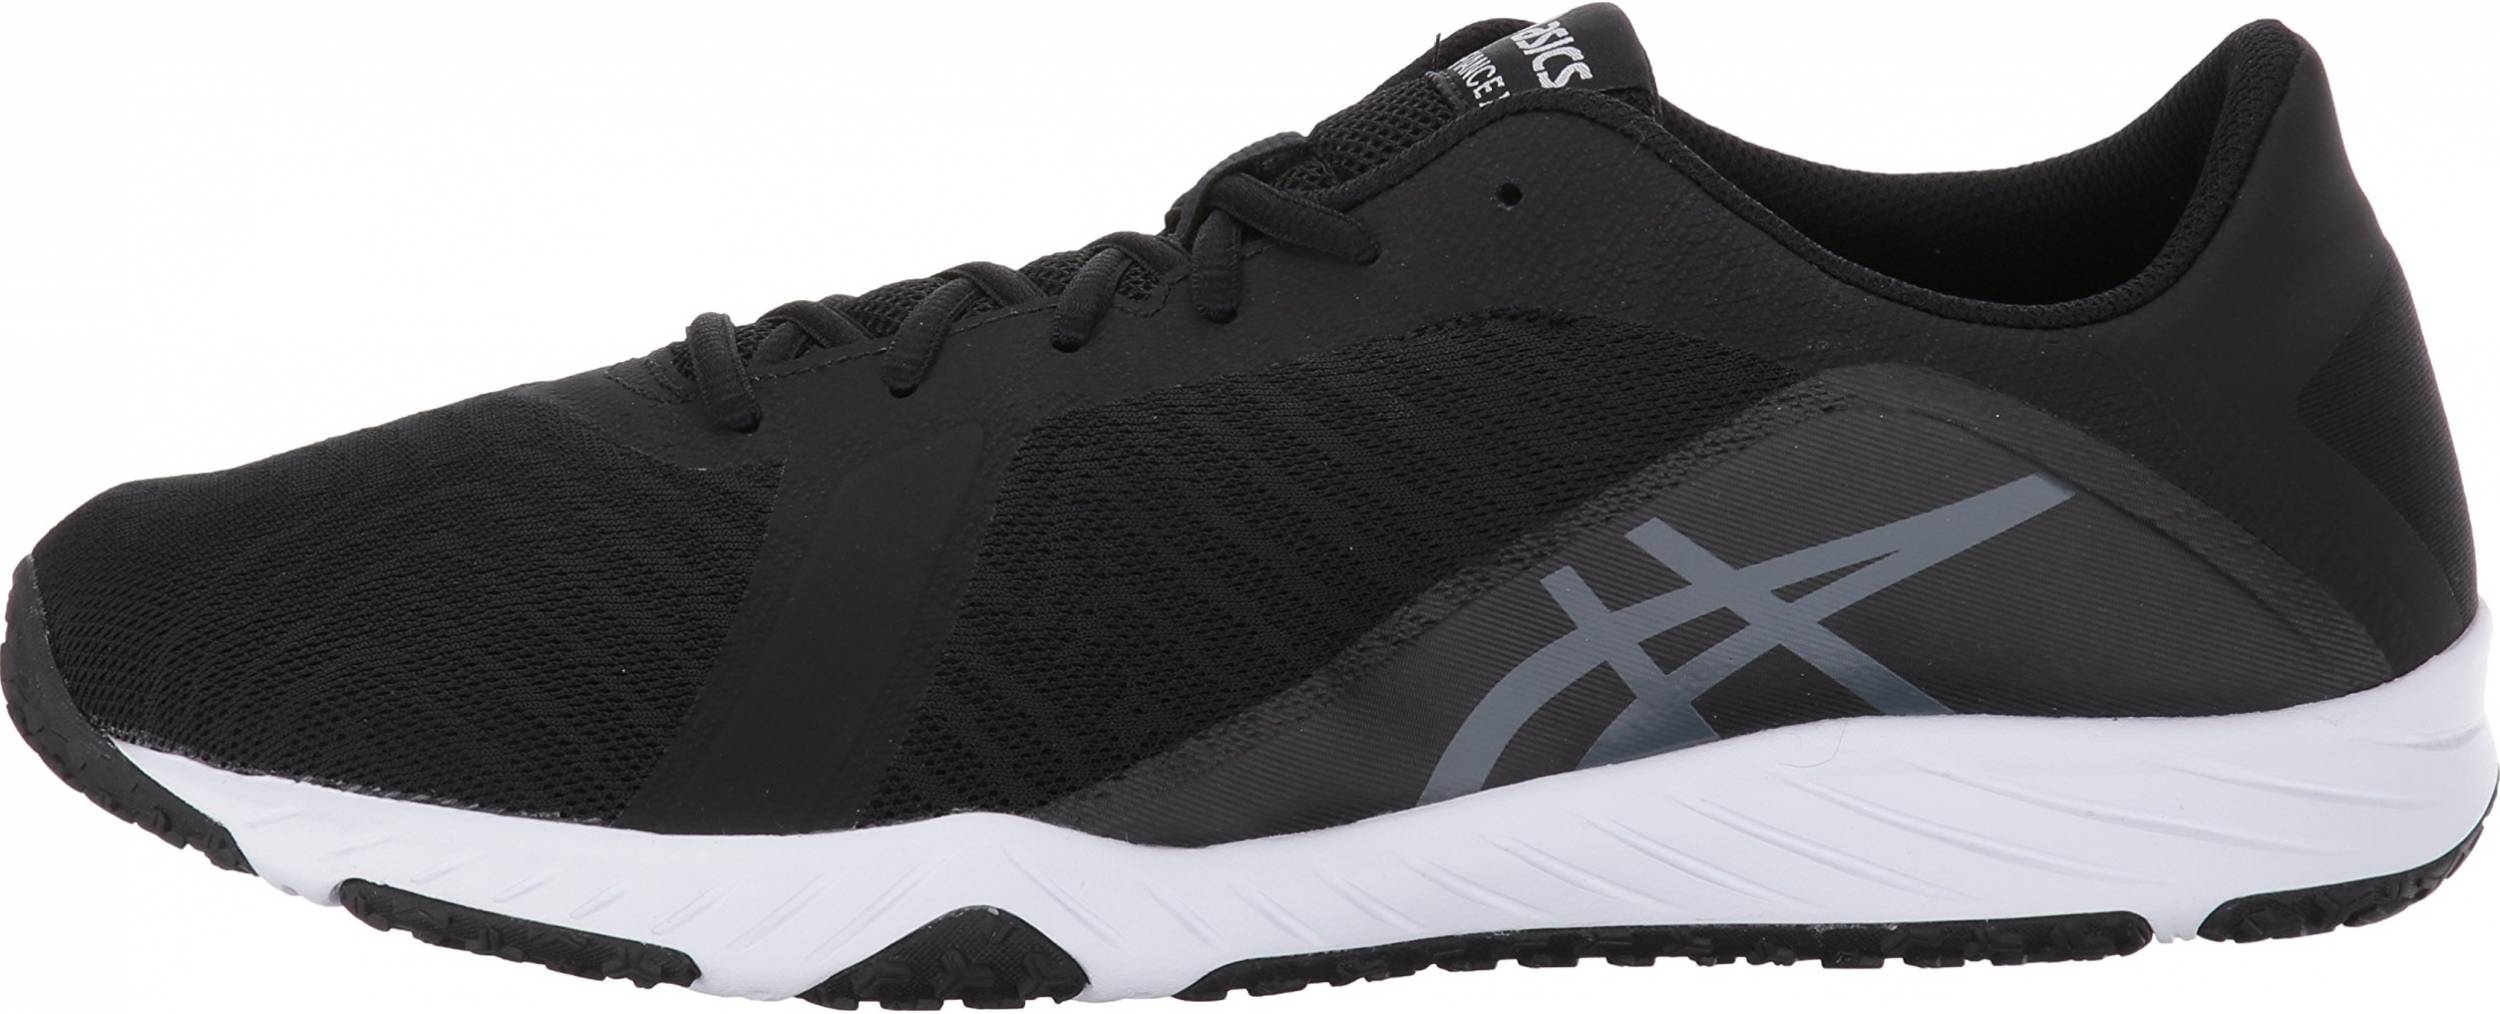 asics trainers for gym